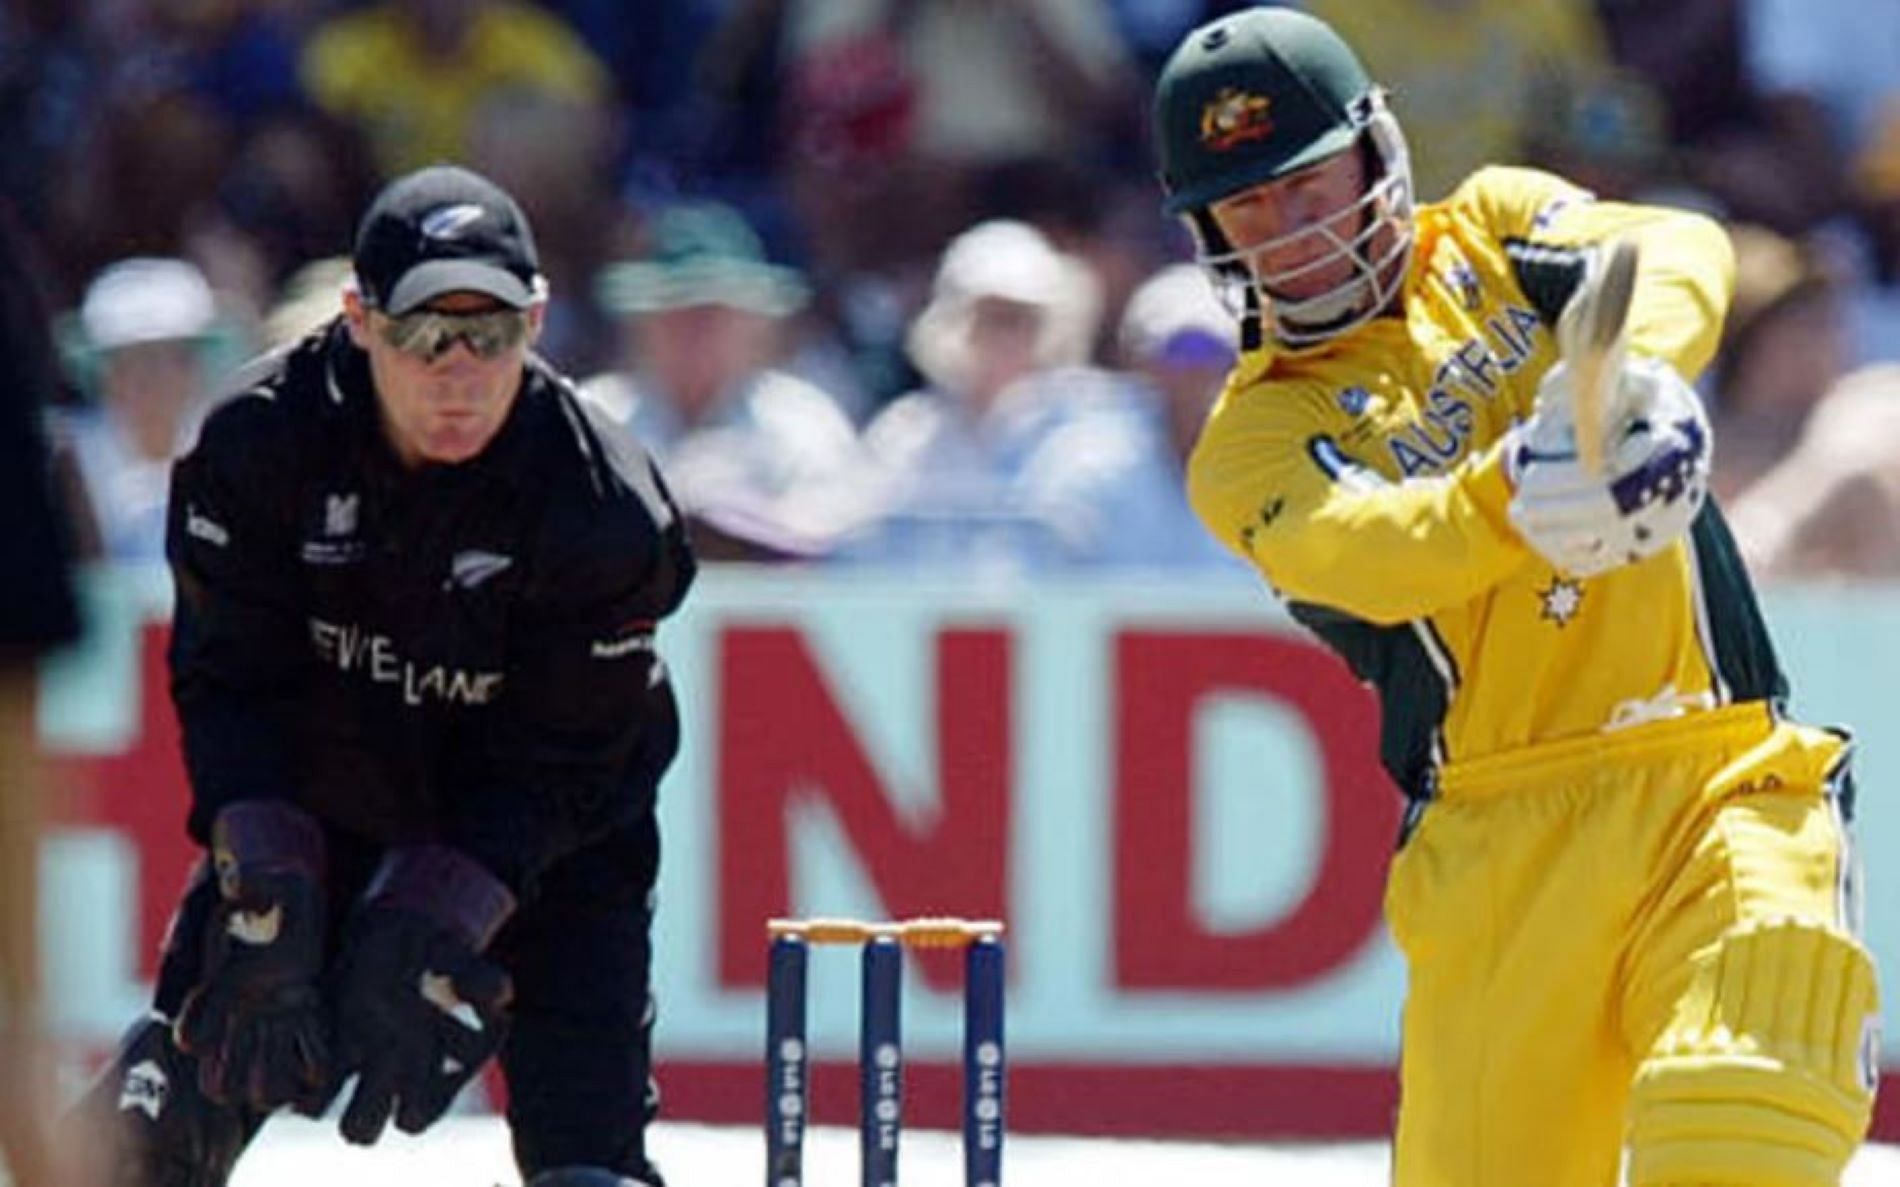 Bichel kept New Zealand at bay with his defiant knock in the 2003 World Cup.